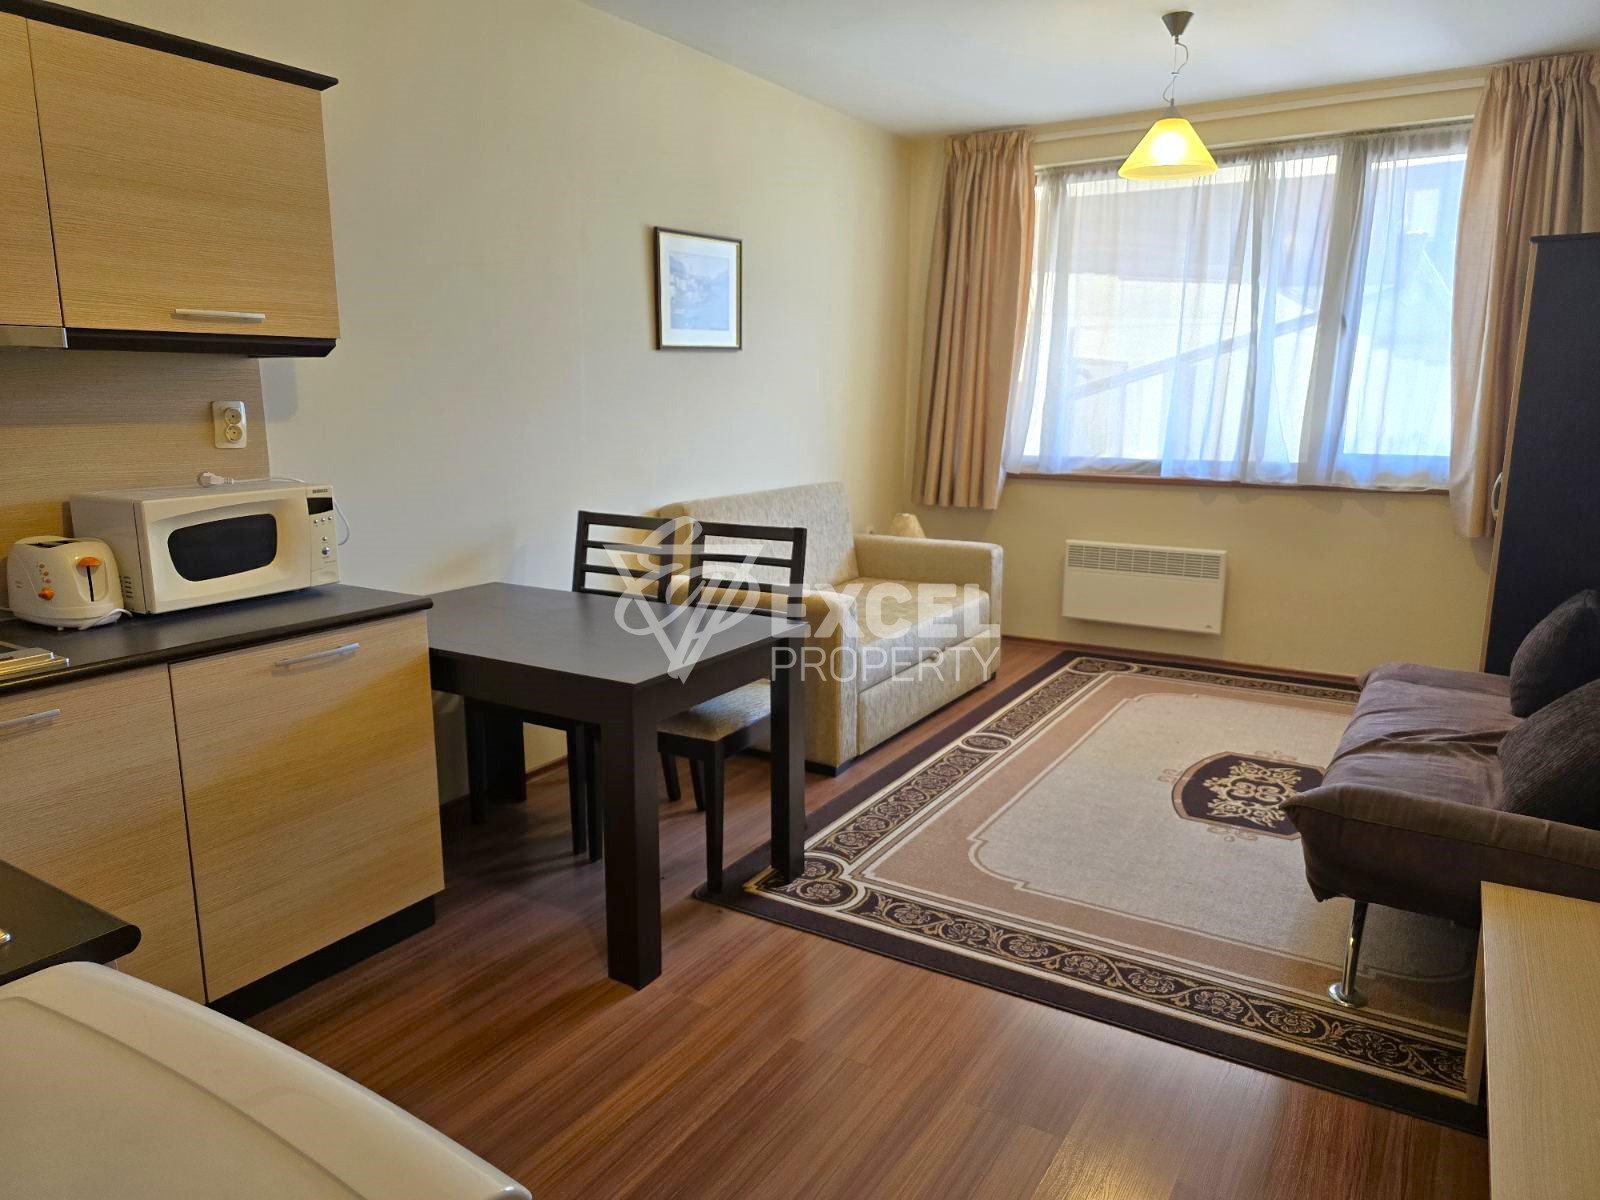 Spacious studio for sale with a captivating mountain view in Hotel Regnum 5✱, Bansko